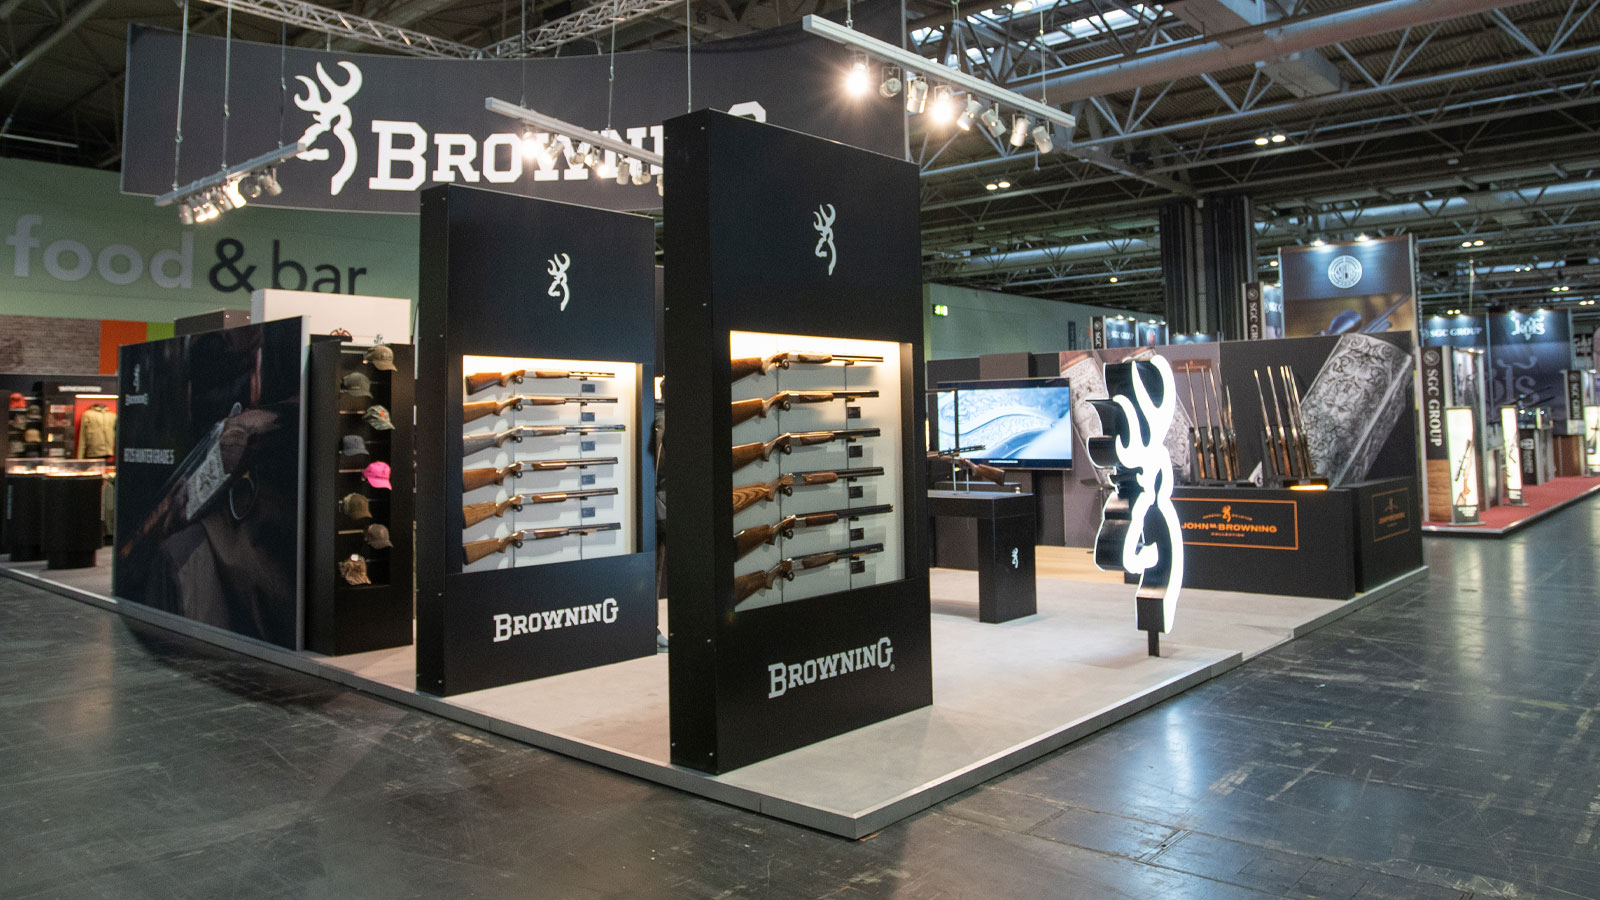 Browning shotguns on the Browning stand at The British Shooting Show